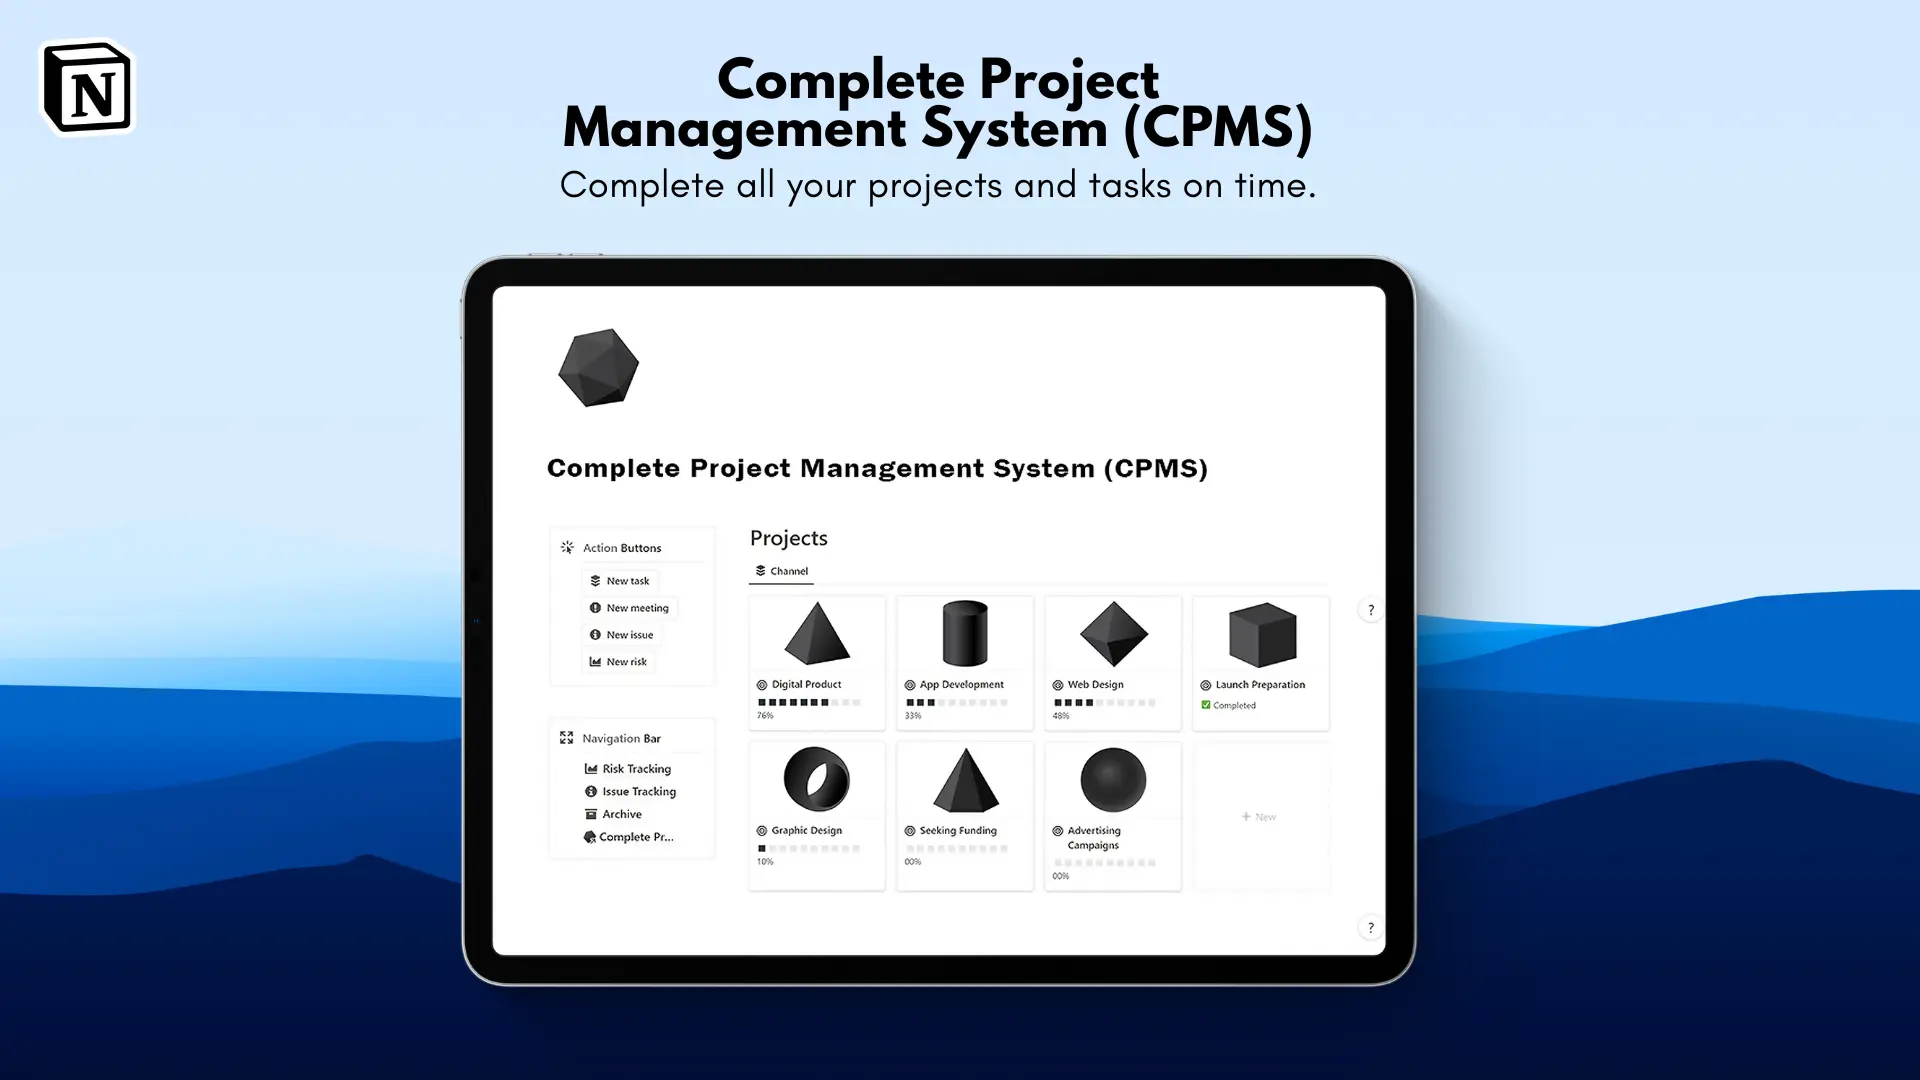 Complete Project Management System image